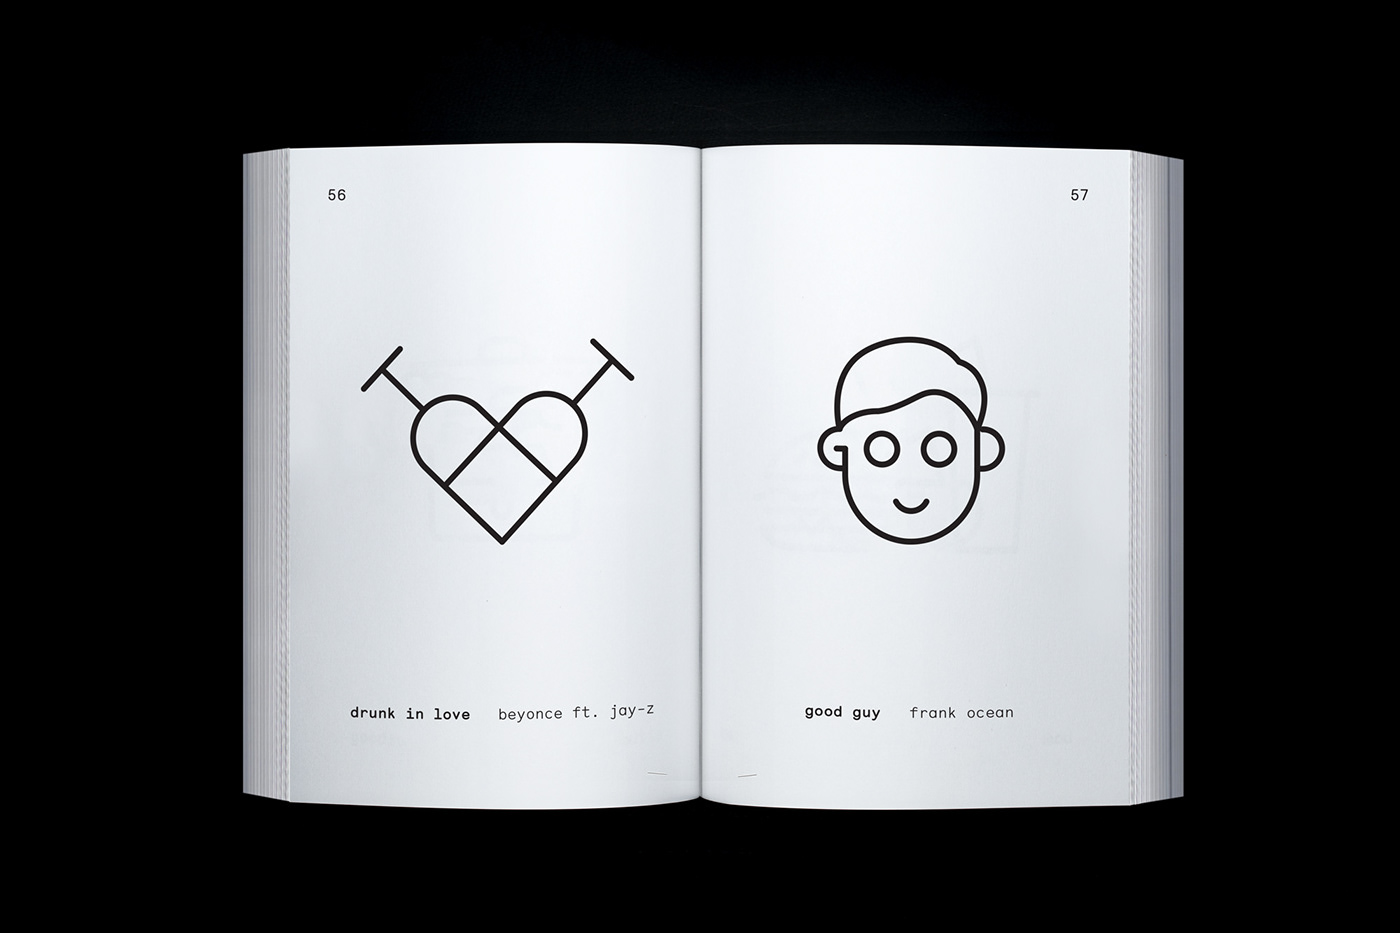 book icons music minimalist pin editorial Layout design art direction  book design